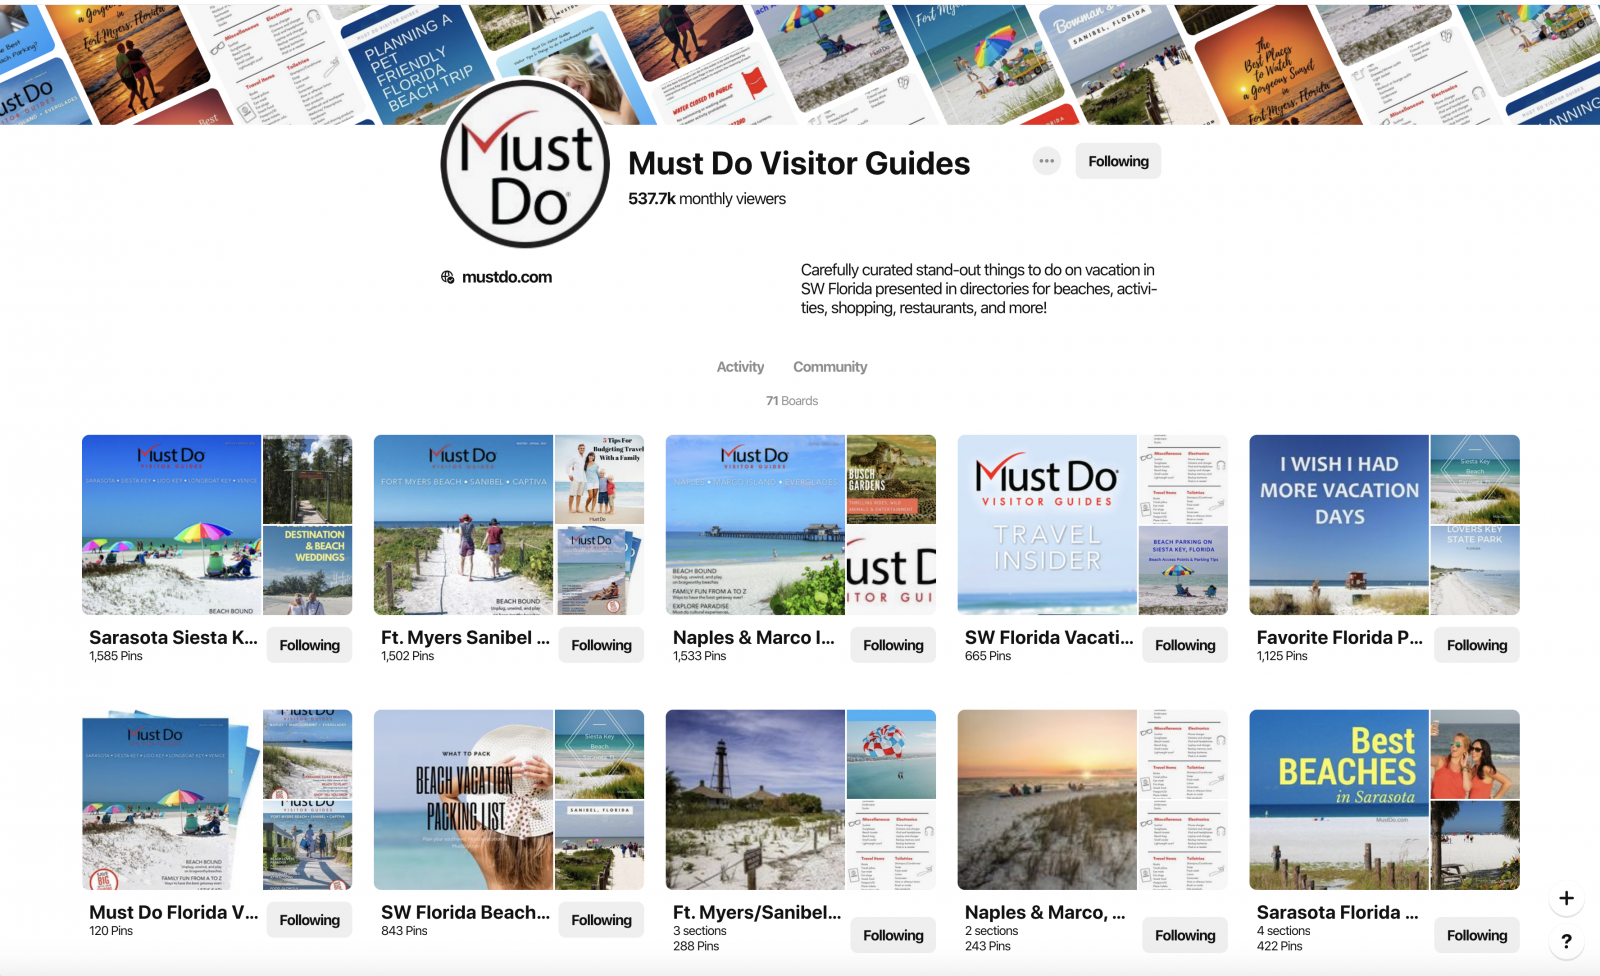 Must Do Visitor Guides Pinterest boards for planning a vacation to Southwest Florida. 